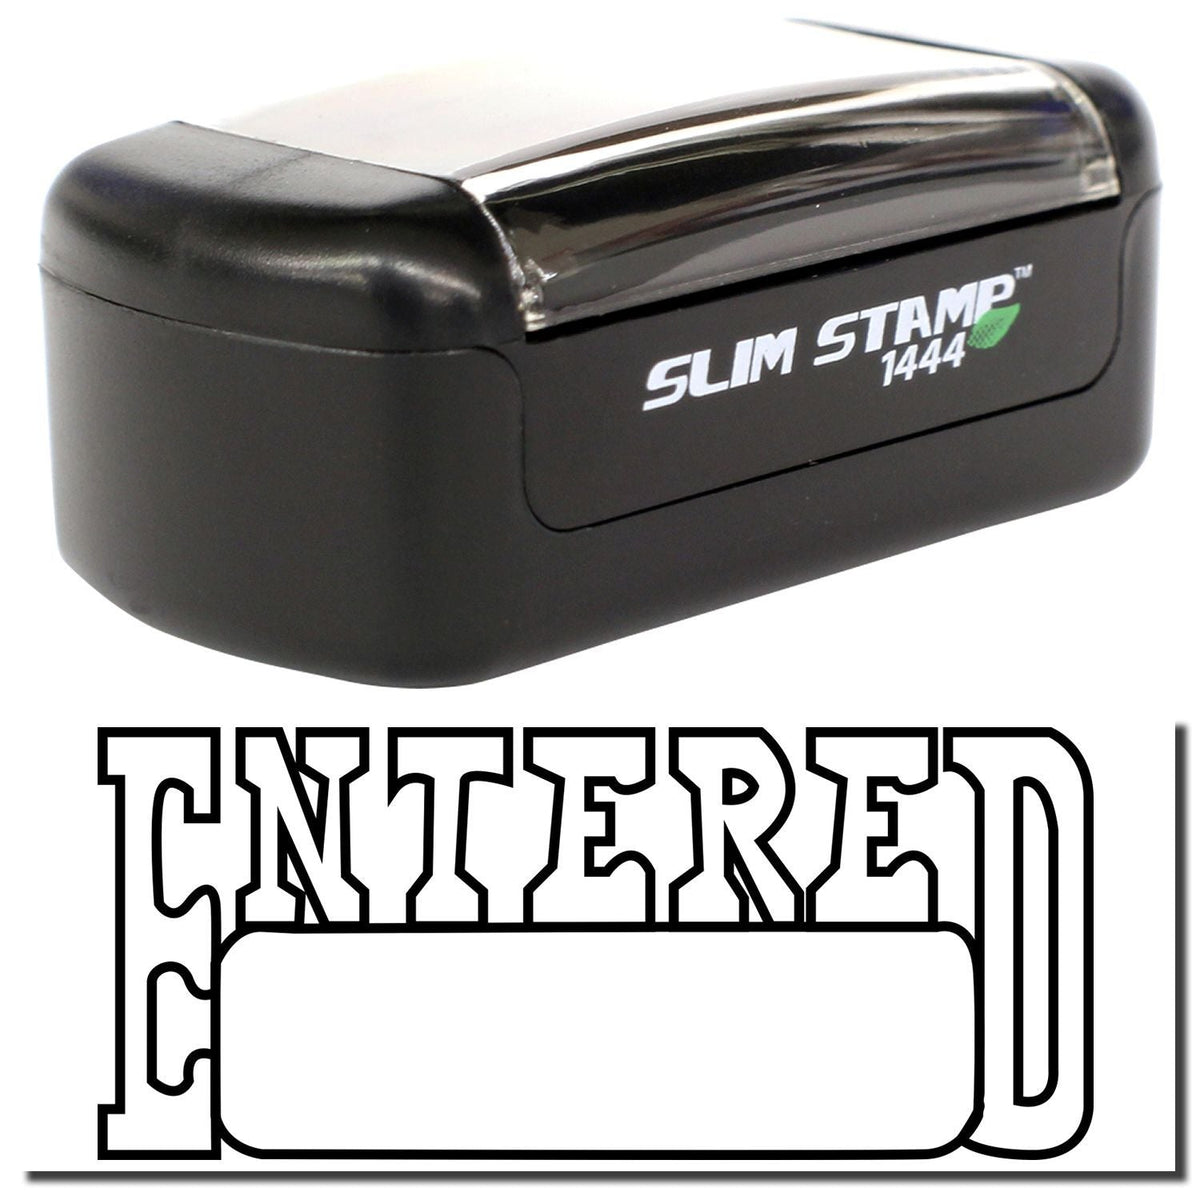 A stock office pre-inked stamp with a stamped image showing how the text &quot;ENTERED&quot; in an outline font with a date box is displayed after stamping.